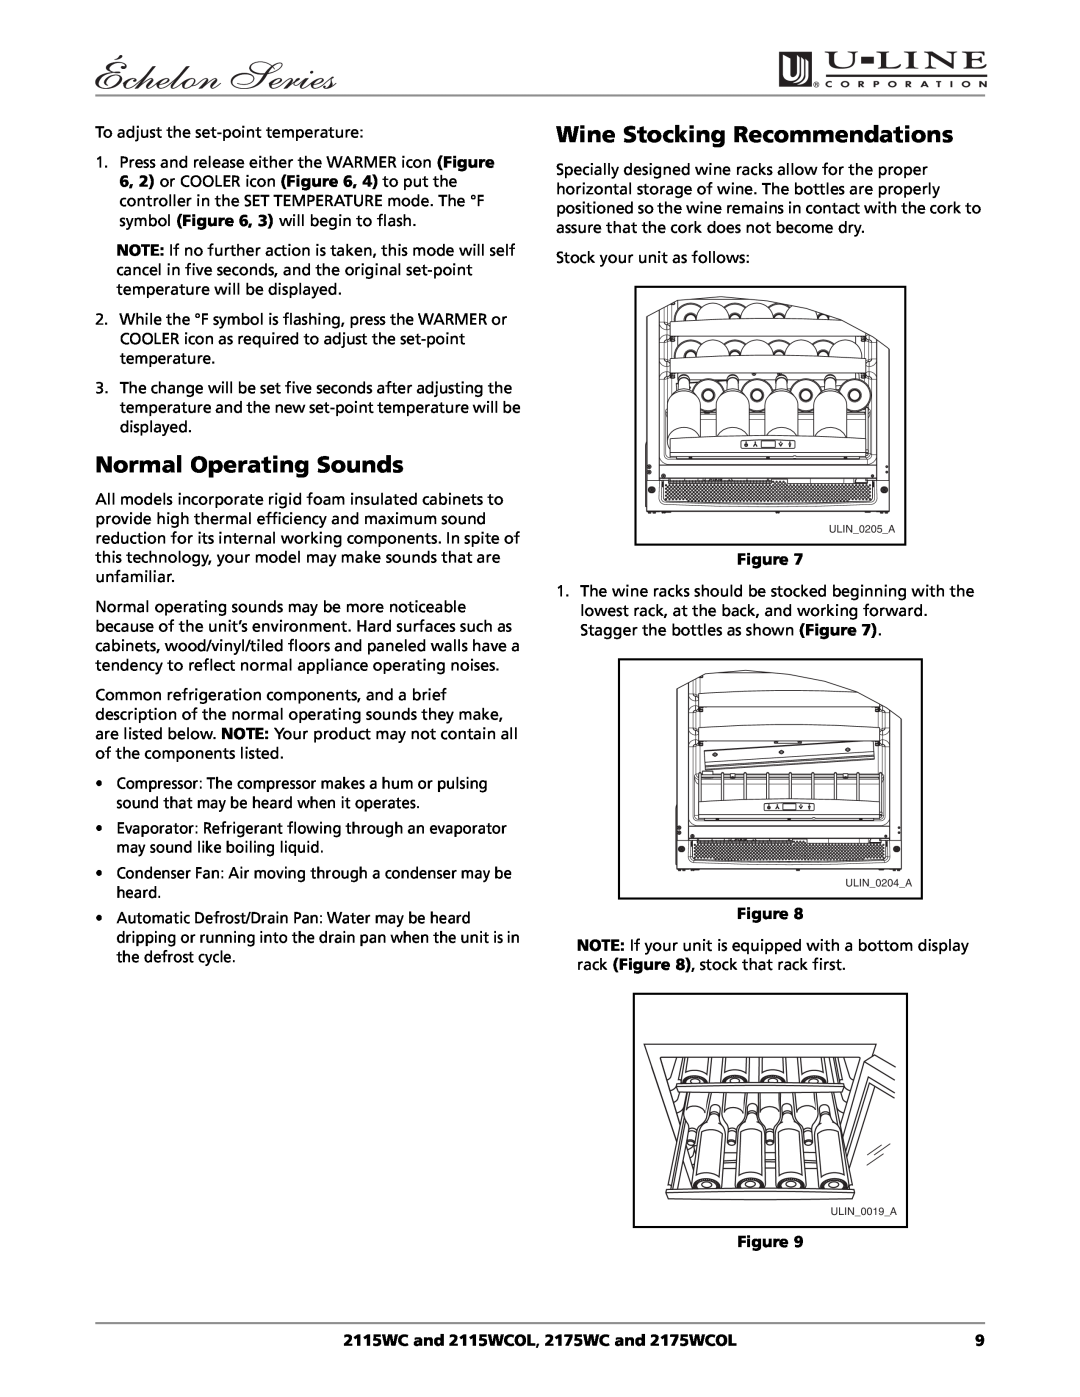 U-Line manual Normal Operating Sounds, Wine Stocking Recommendations, 2115WC and 2115WCOL, 2175WC and 2175WCOL 